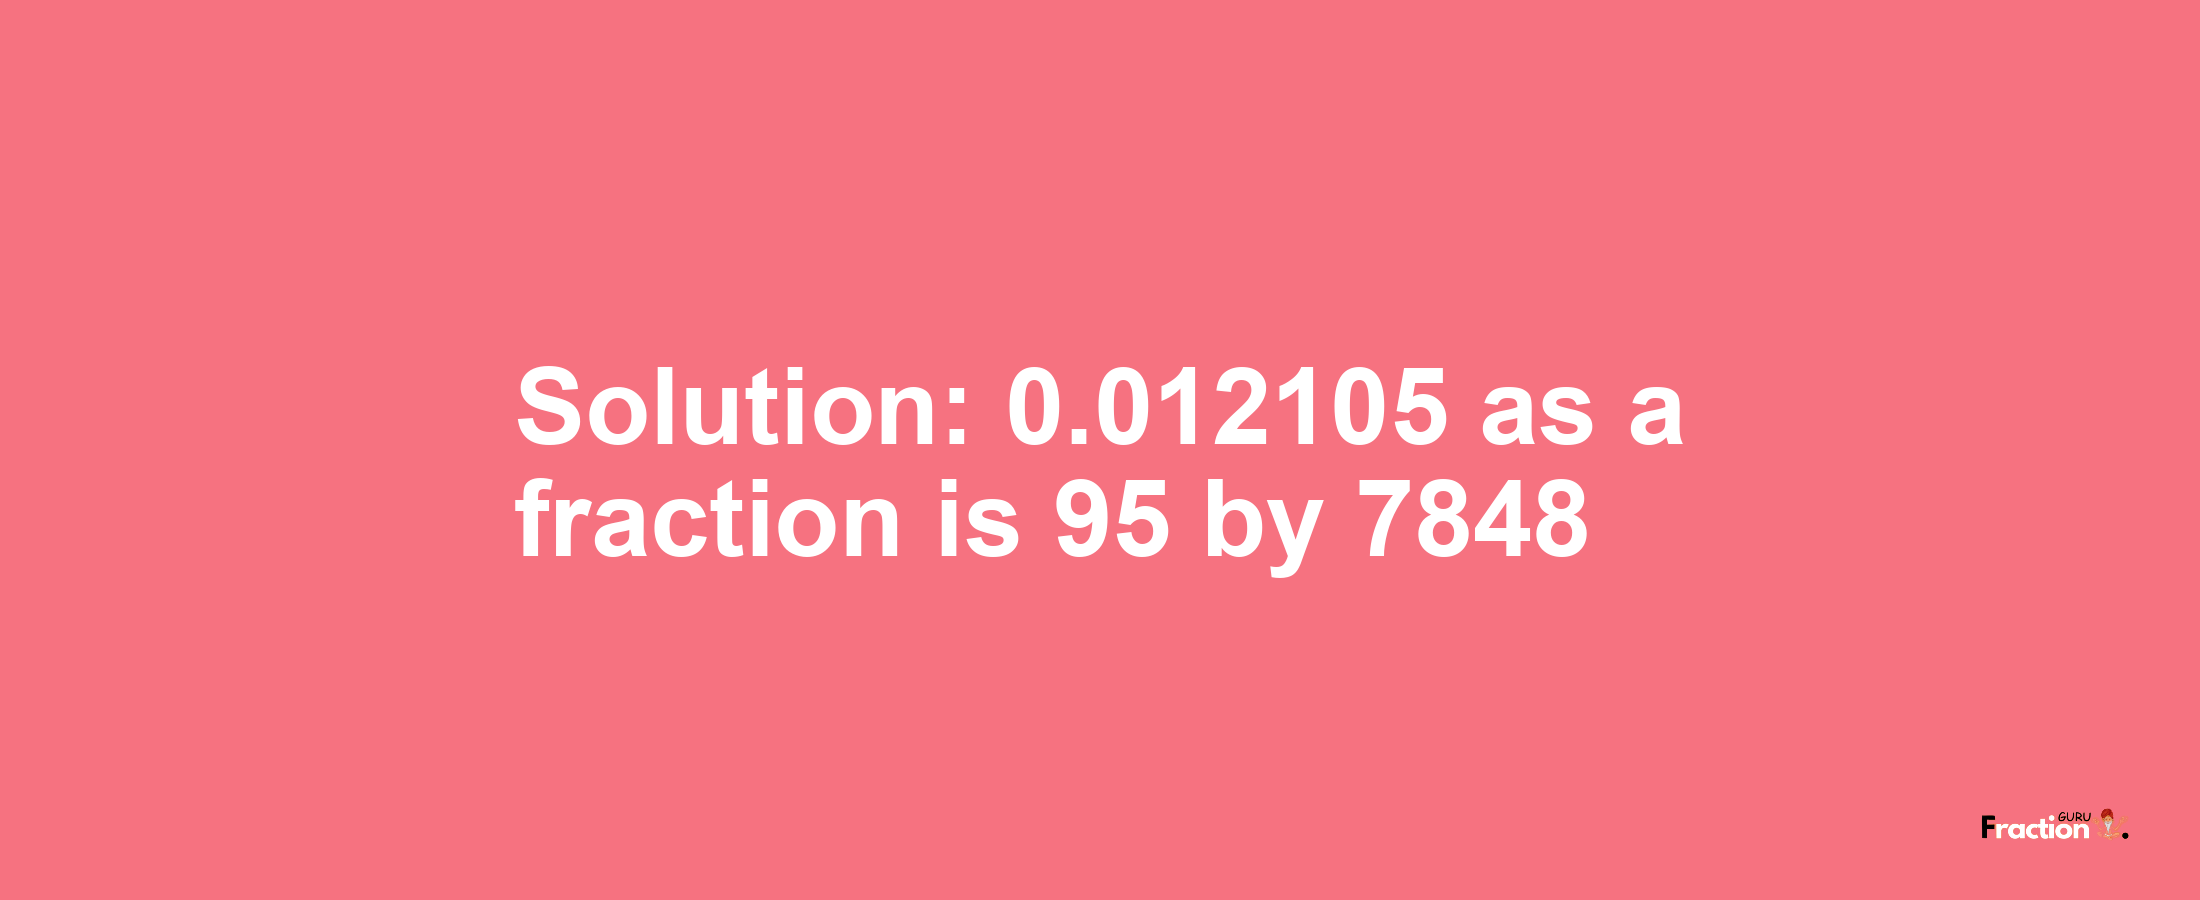 Solution:0.012105 as a fraction is 95/7848